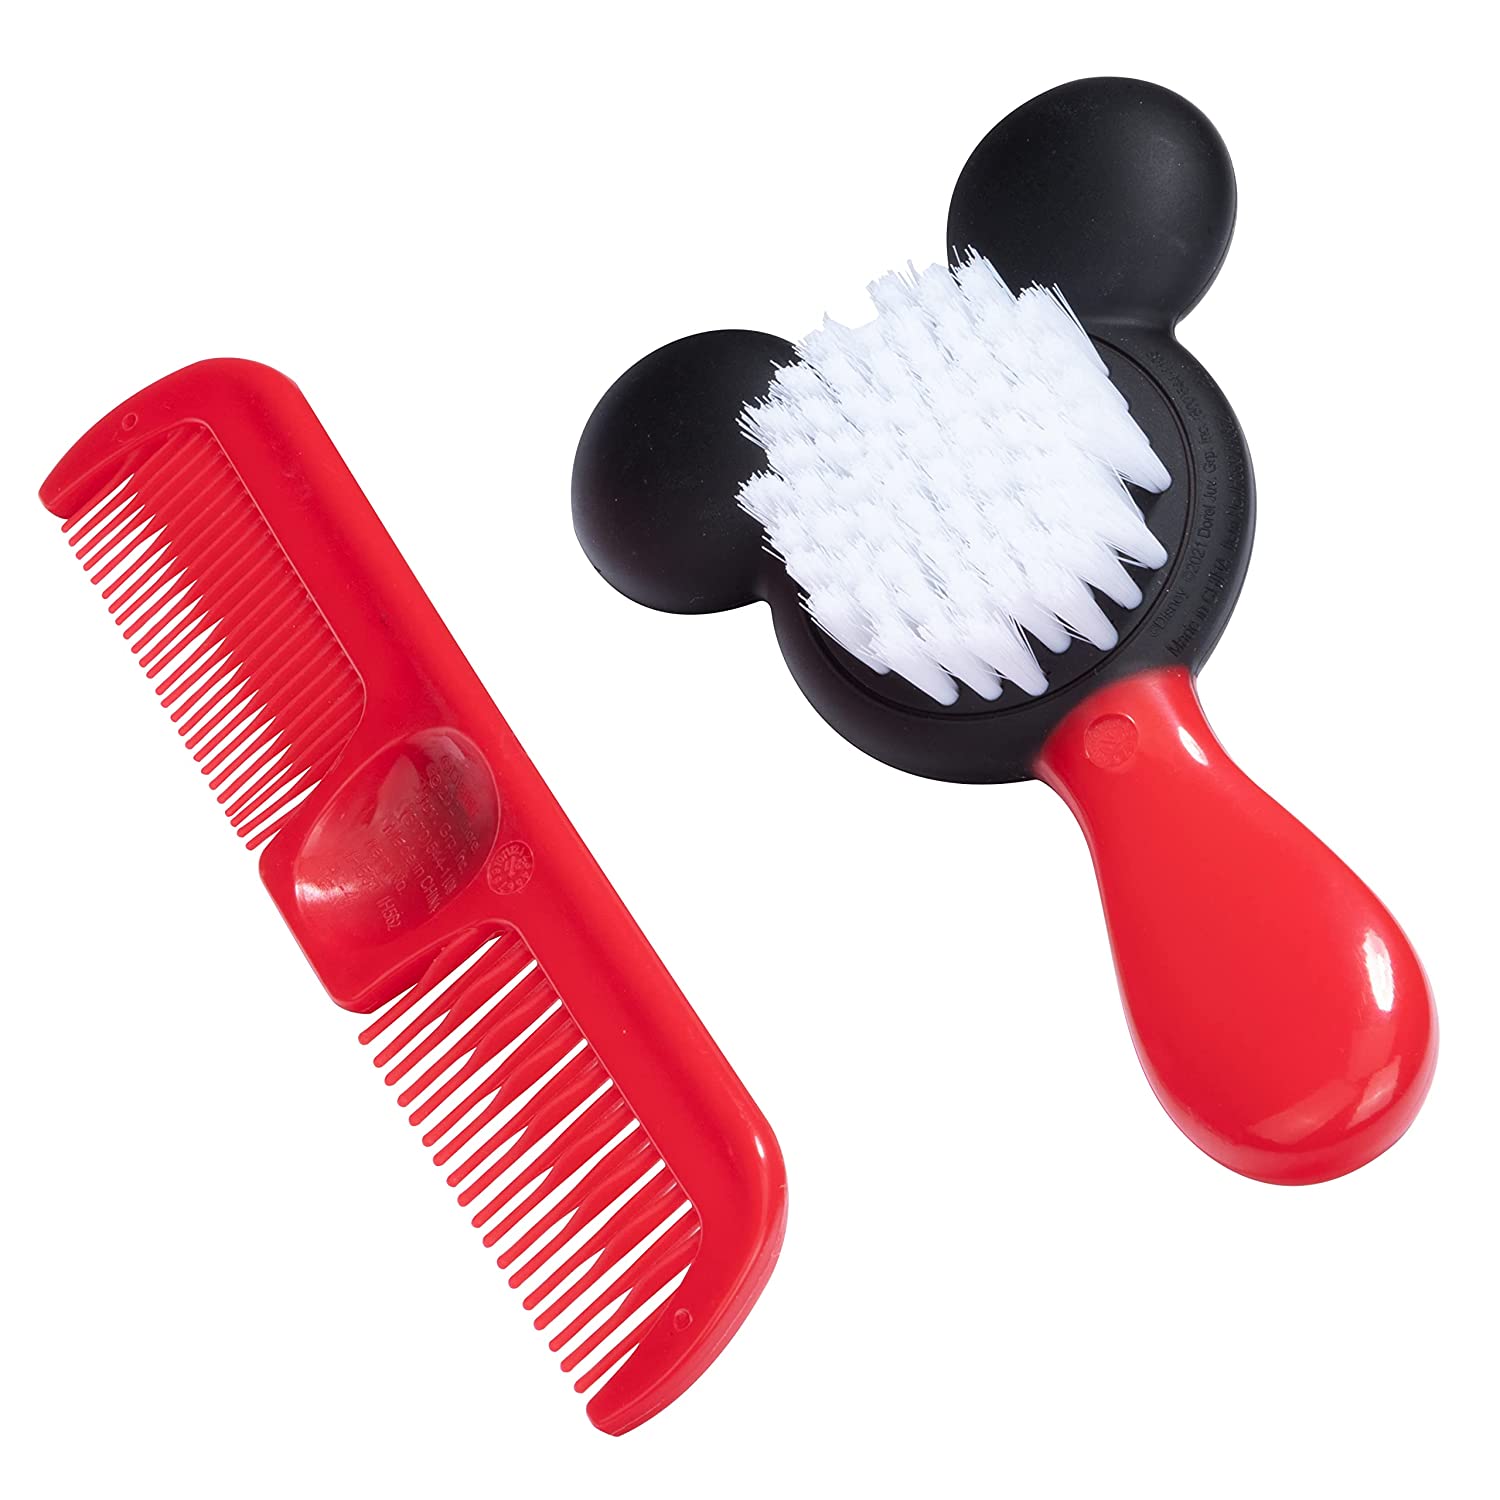 Disney Baby Mickey Mouse Brush & Comb Set, Red - With Easy Grip Handles